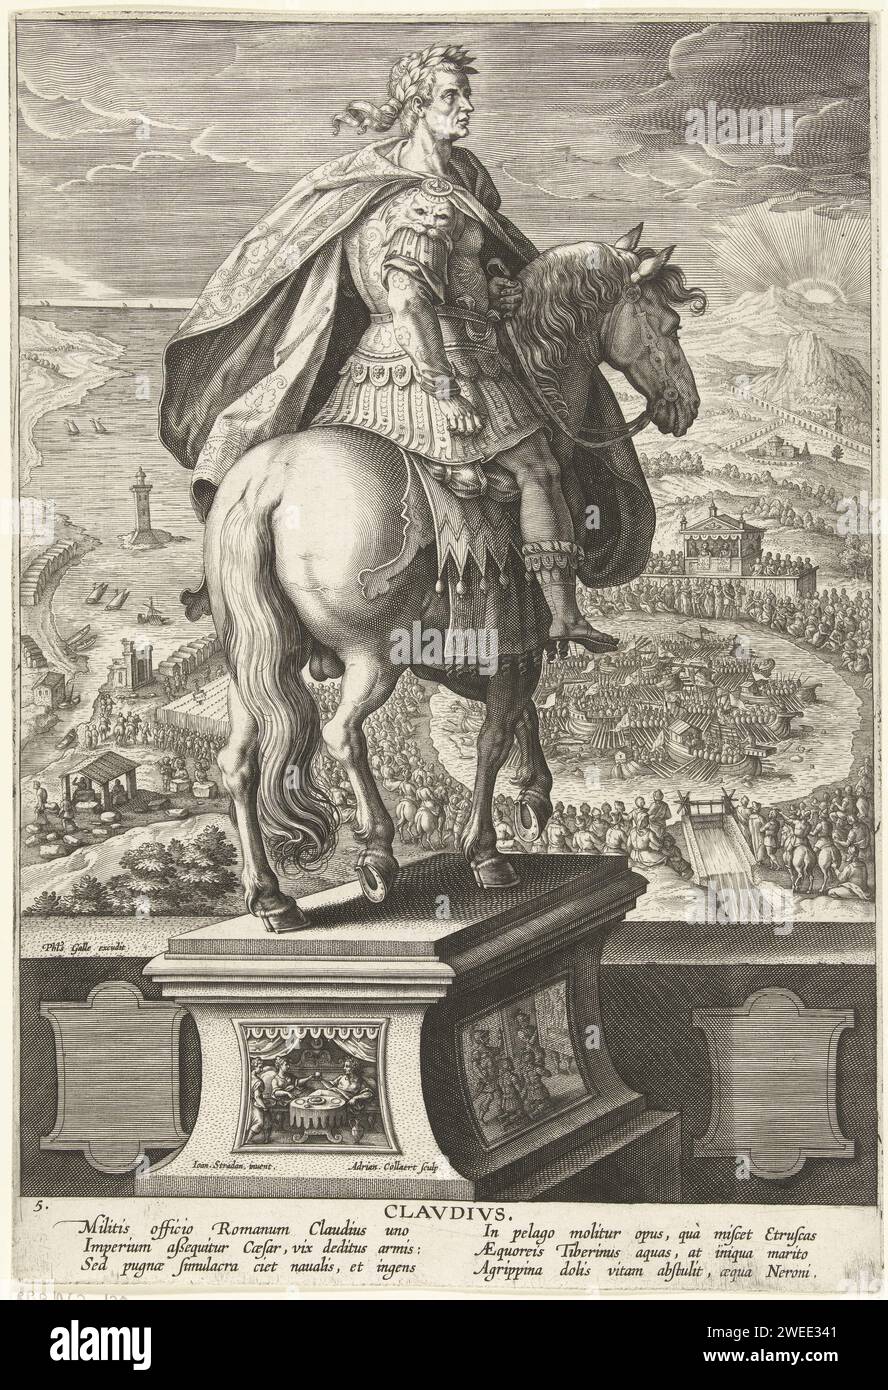 Emperor Claudius on horseback, Adriaen Collaert, after Jan van der Straet, 1587 - 1589 print On a column Keizer Claudius on horseback. In the background scenes from his life. On the left the construction of a channel that connects the tiber to the sea. On the right a sea battle that was re -enacted in one of his famous Naumachia. Cartouches on the column show his marriage to Agrippina and his art patronage. The print has a Latin caption. The print is part of a twelve -part series about Roman emperors. Antwerp paper engraving (story of) Claudius the Roman emperor. (story of) Claudius the Roman Stock Photo